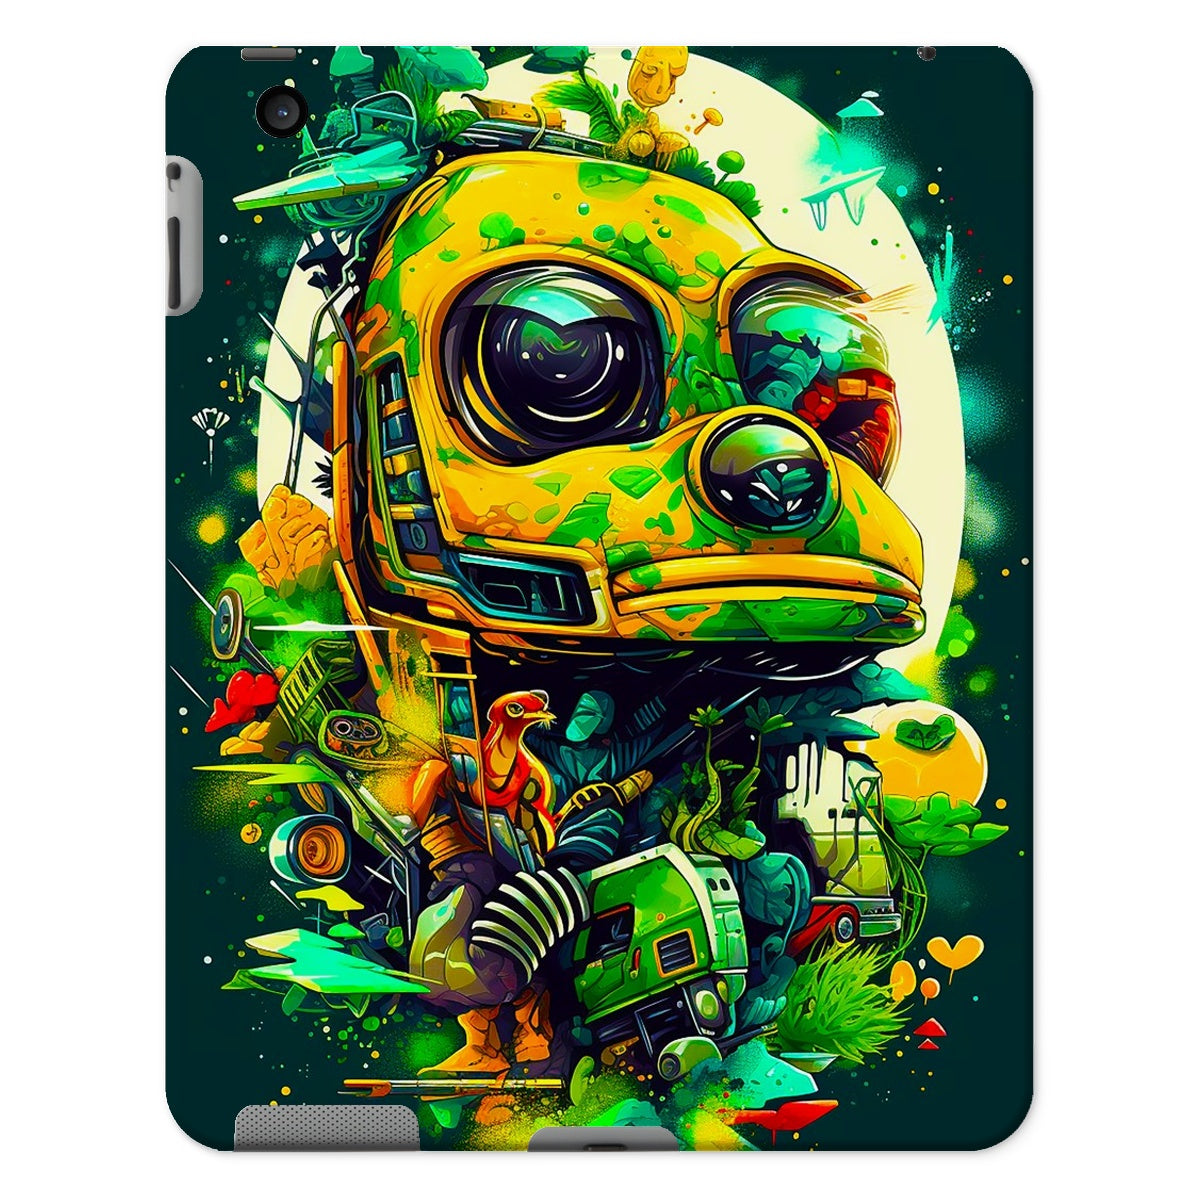 Mechanical Muse: Vibrant Graffiti Odyssey in Surreal Auto Wonderland Tablet Cases